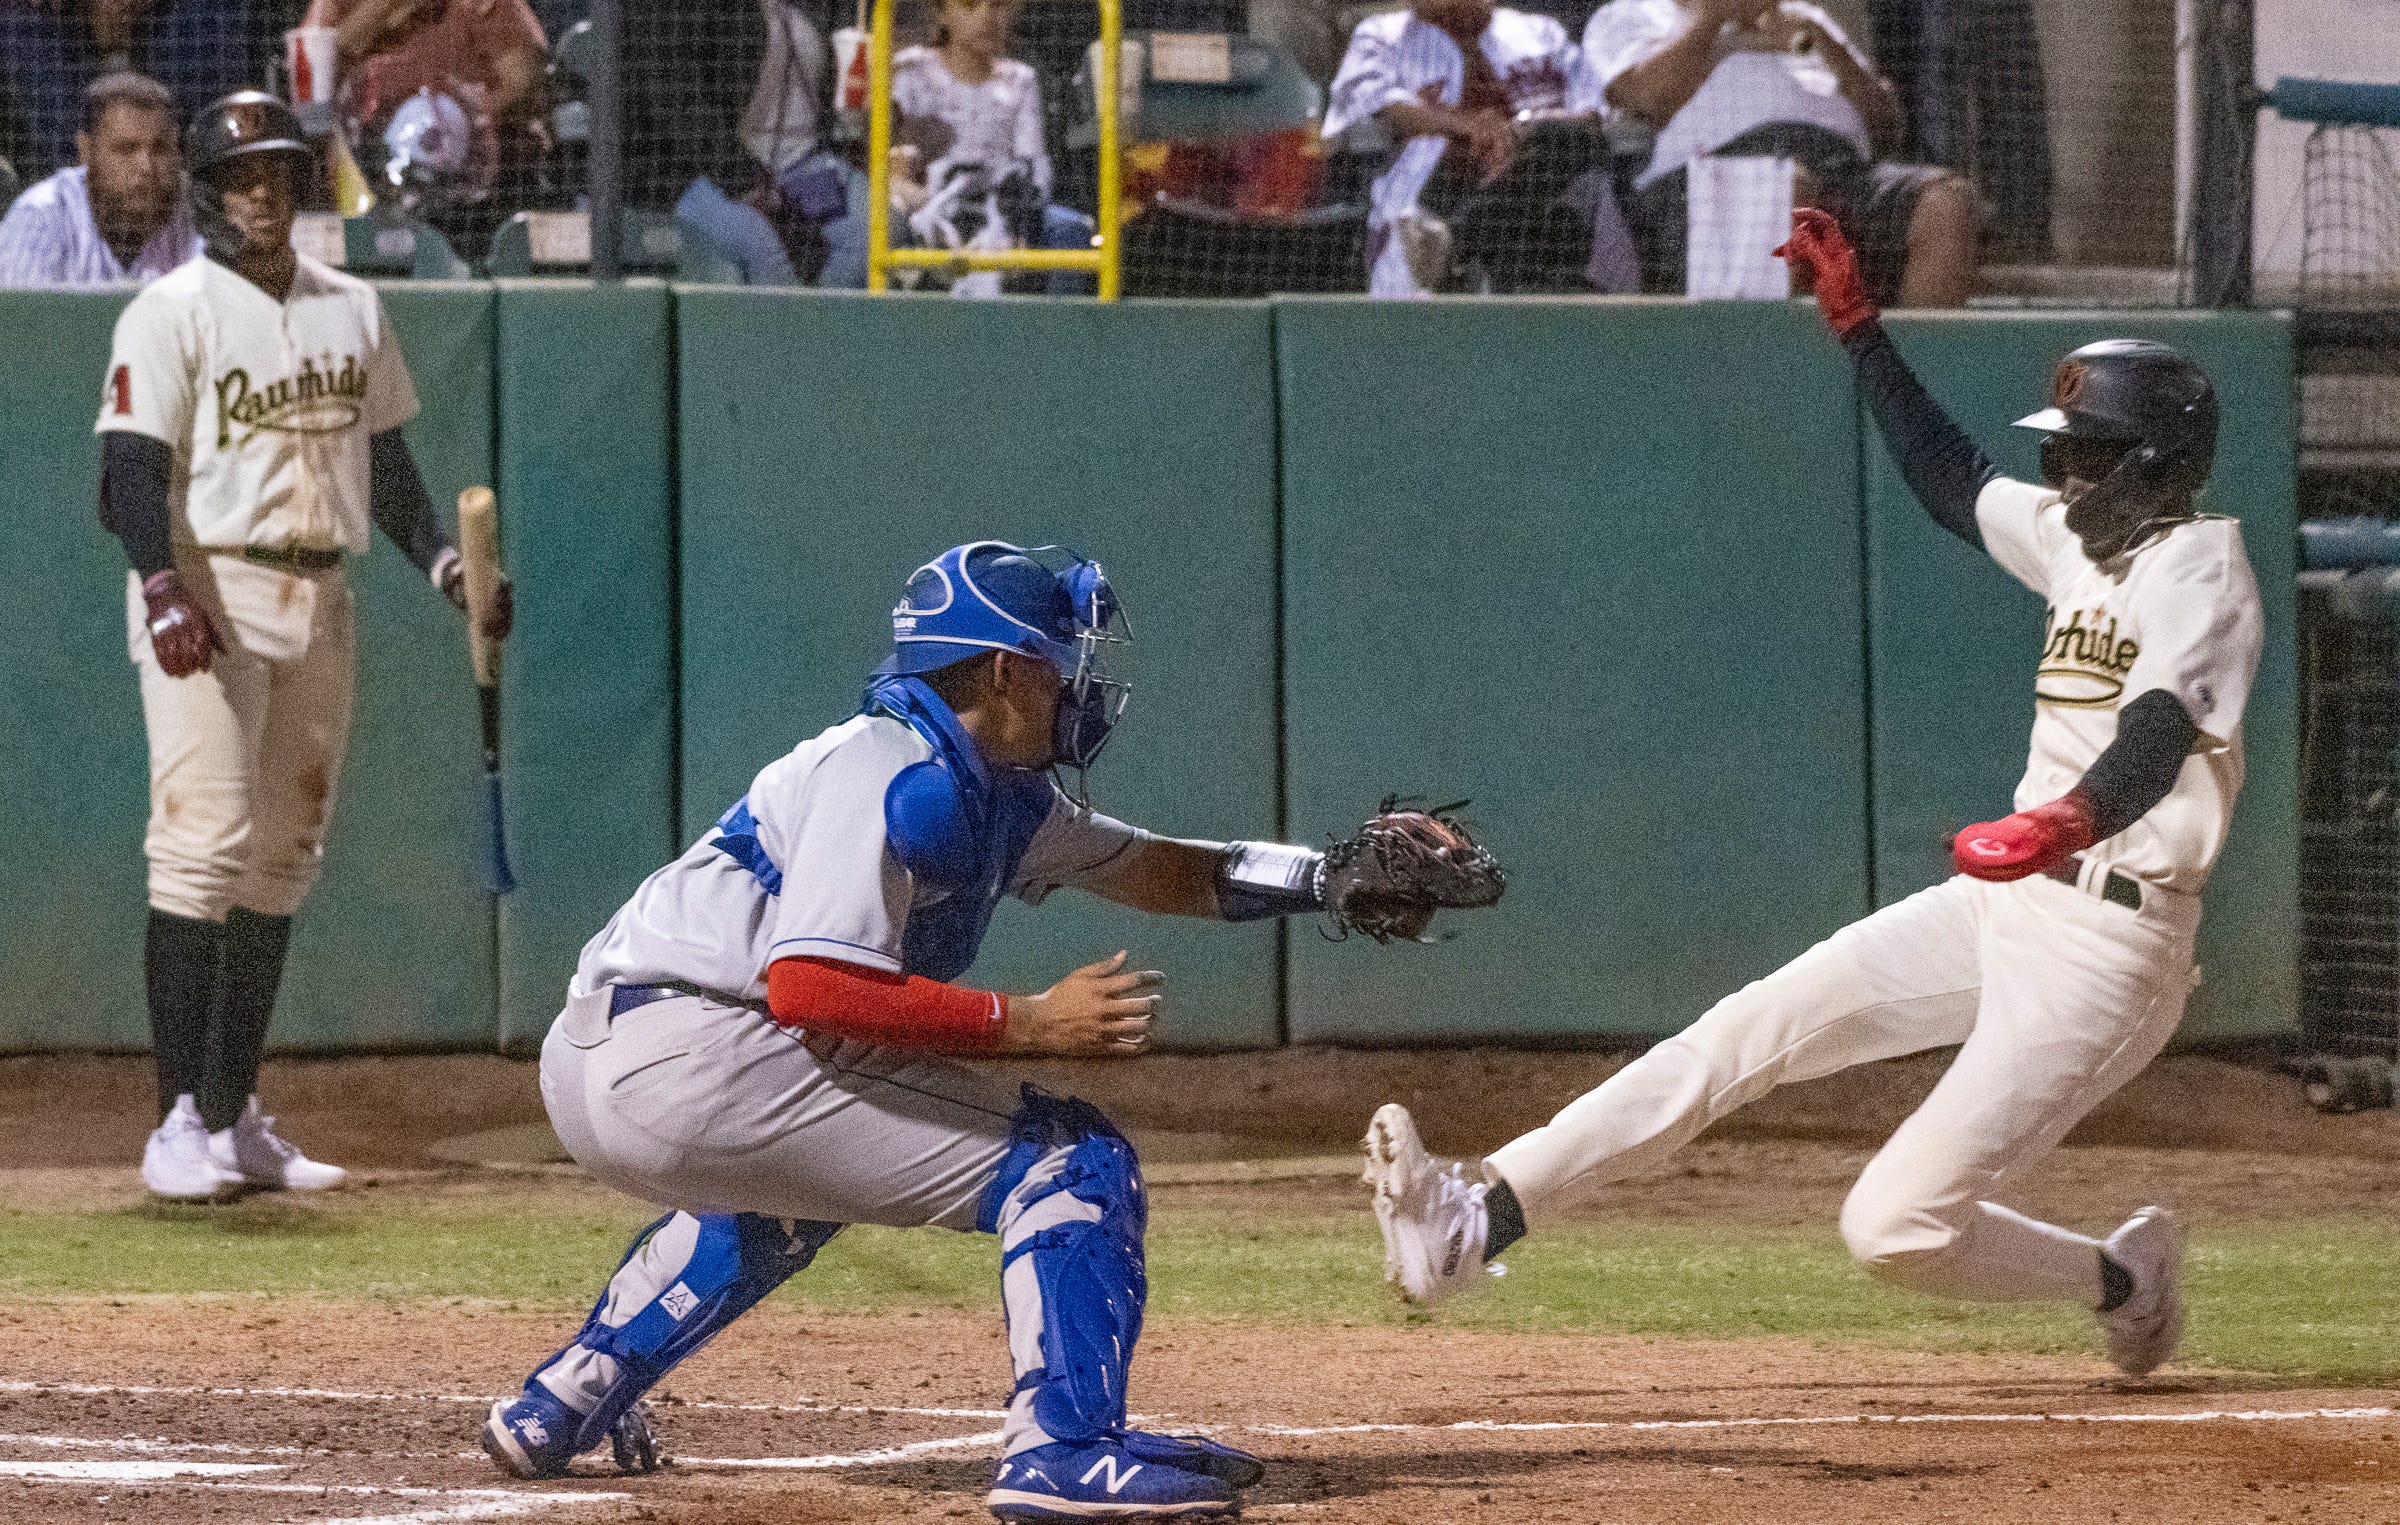 Dodgers minor league catcher Thayron Liranzo hit another home run for Low-A Rancho Cucamonga on Wednesday, May 31 against Inland Empire.